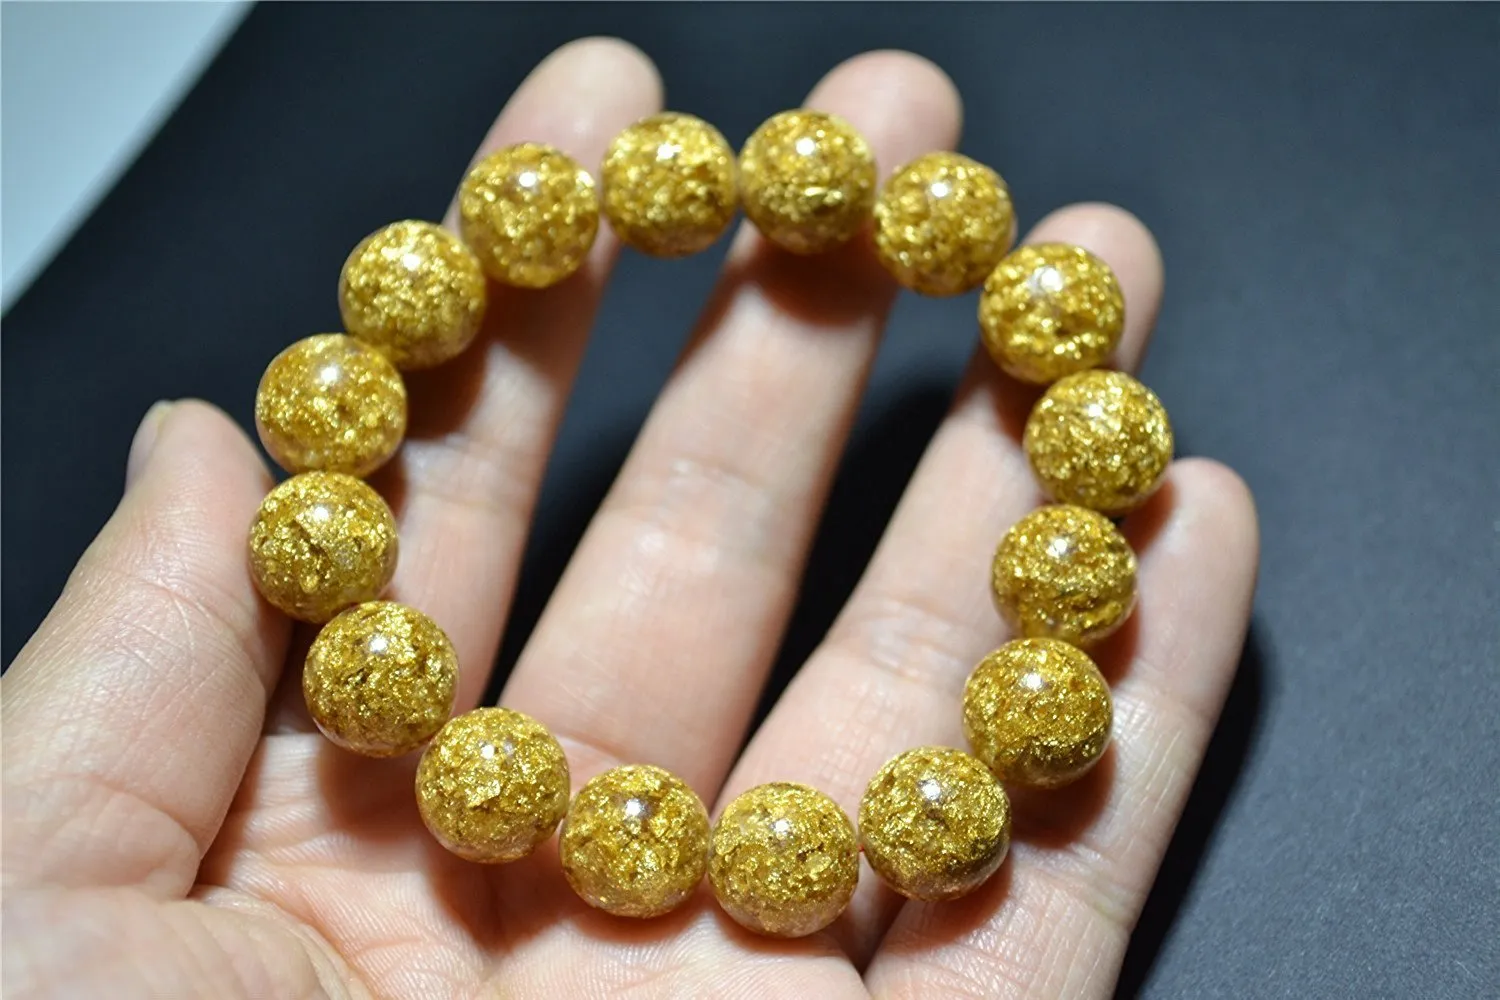 24k Gold Foil Beads Bracelet 12mm Gemstone Female Fashion Temperament Jewelry Gems Accessories Gifts Whole9049269